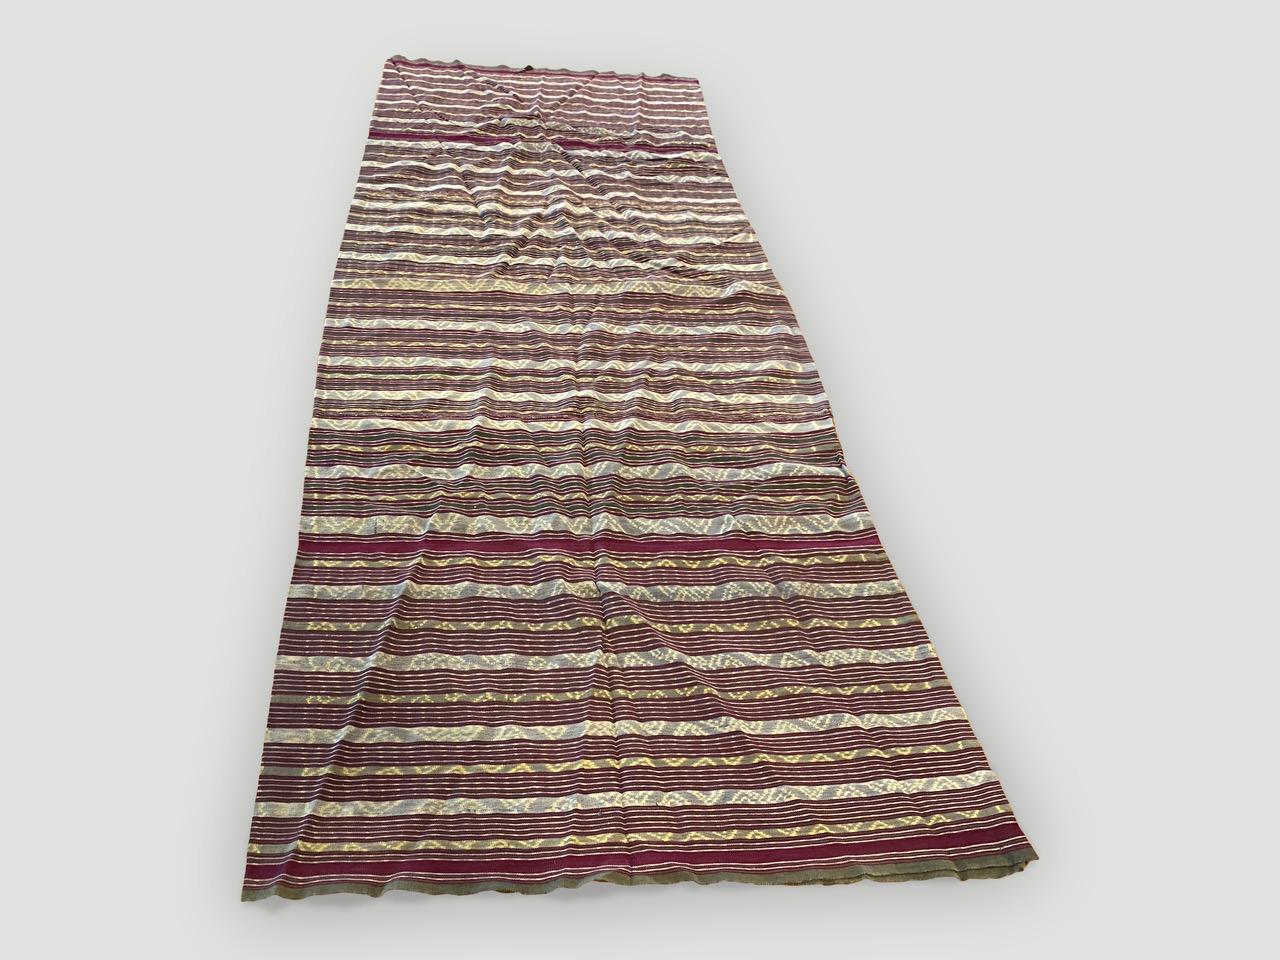 Beautiful antique sarong from Sumatra. There are so many uses for this soft cotton handwoven textile. This sarong is sewn into a circle to step into and roll around the waist to be worn. Opened the size is 69